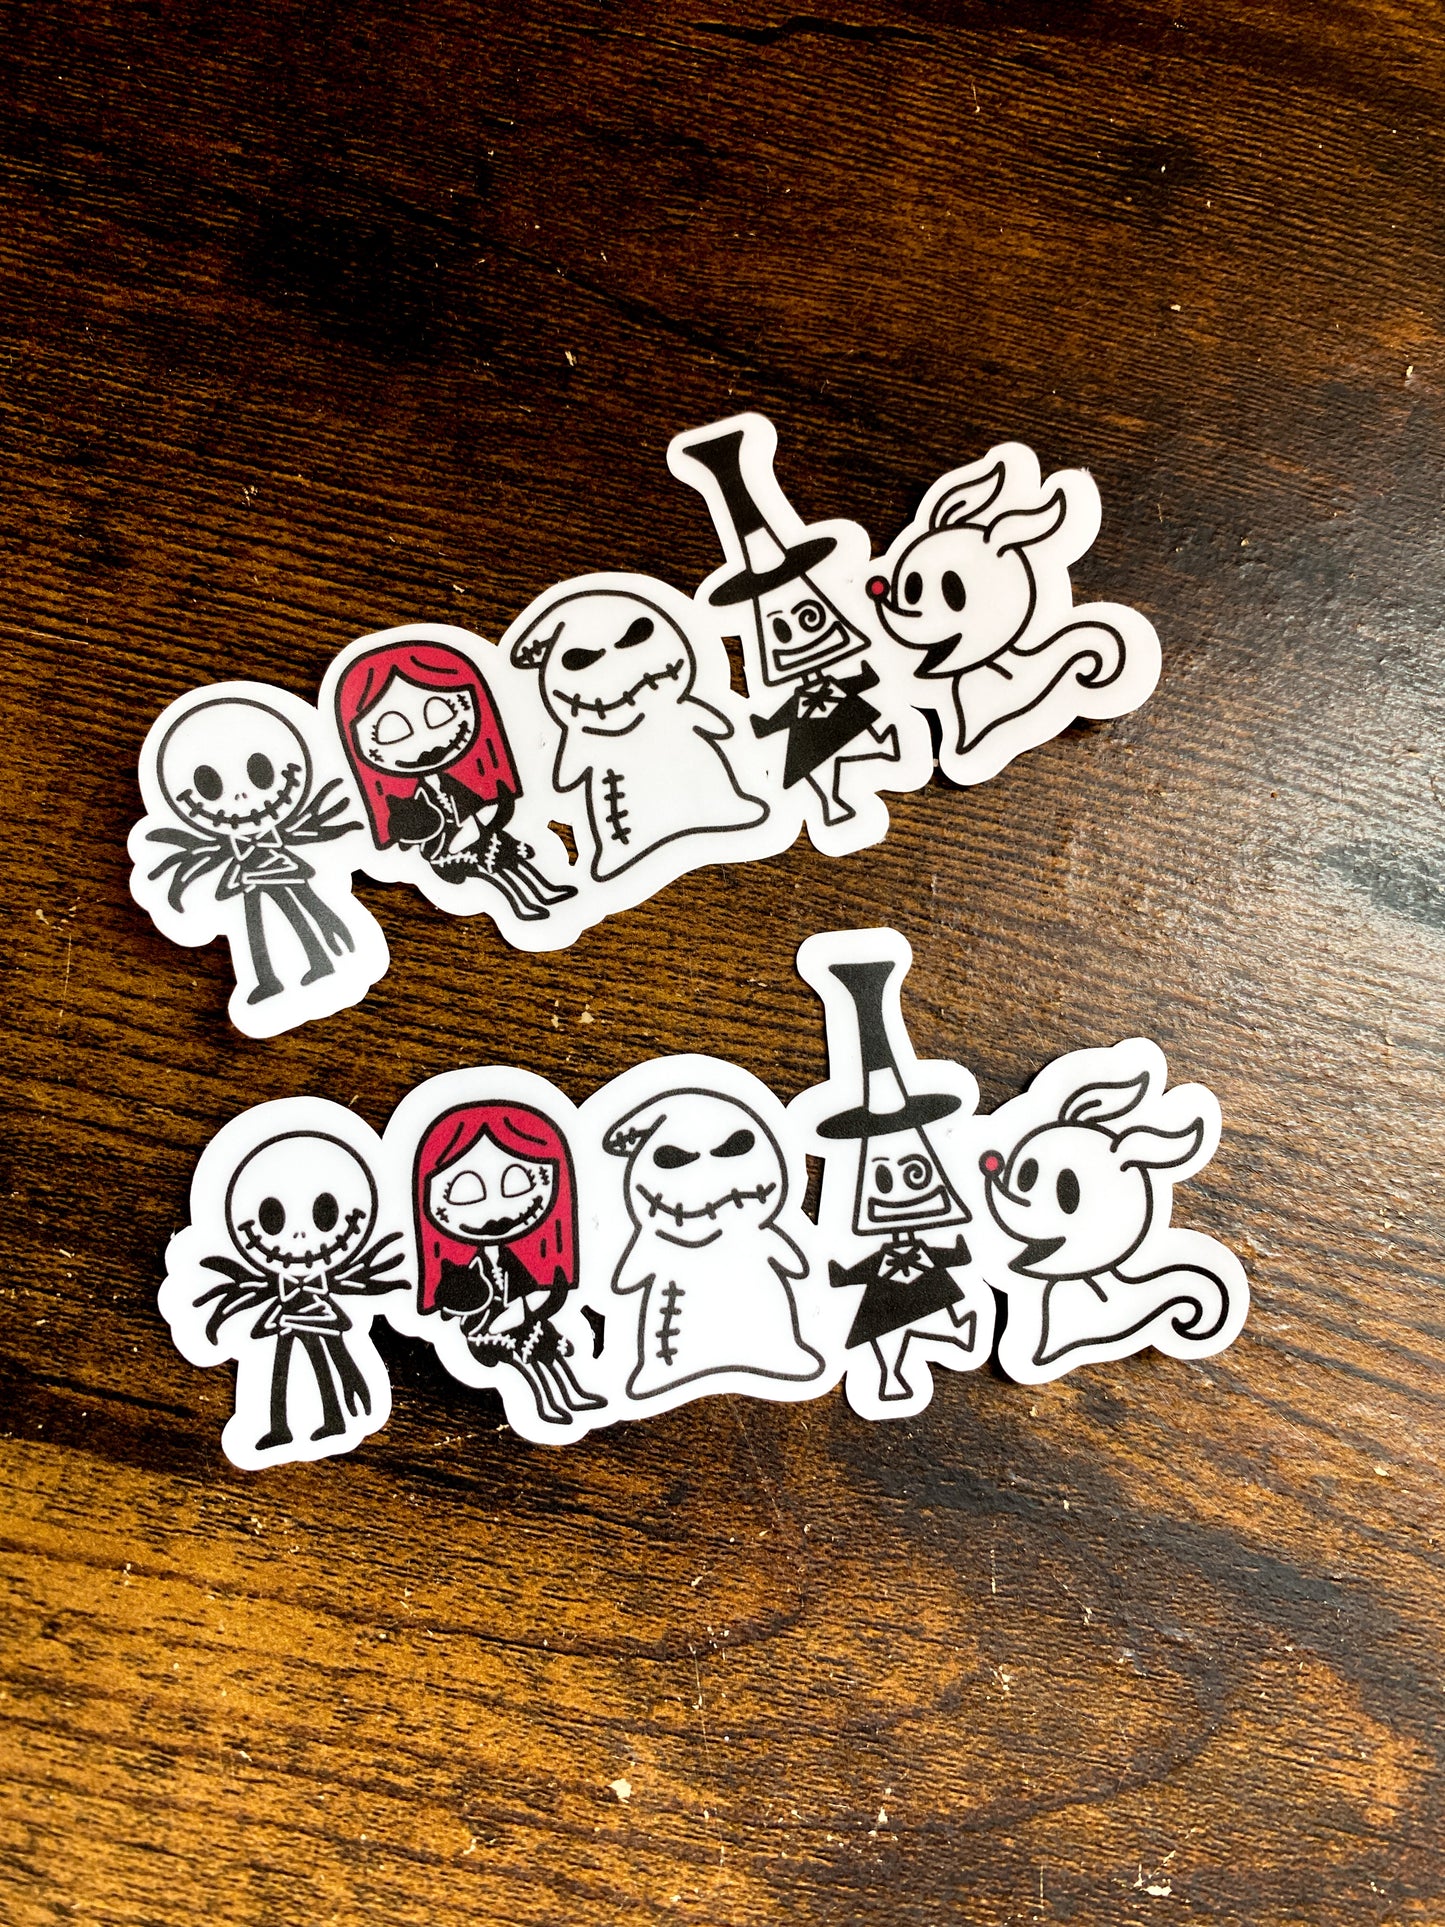 2 Nightmare Before Christmas Stickers. Black, white and red.